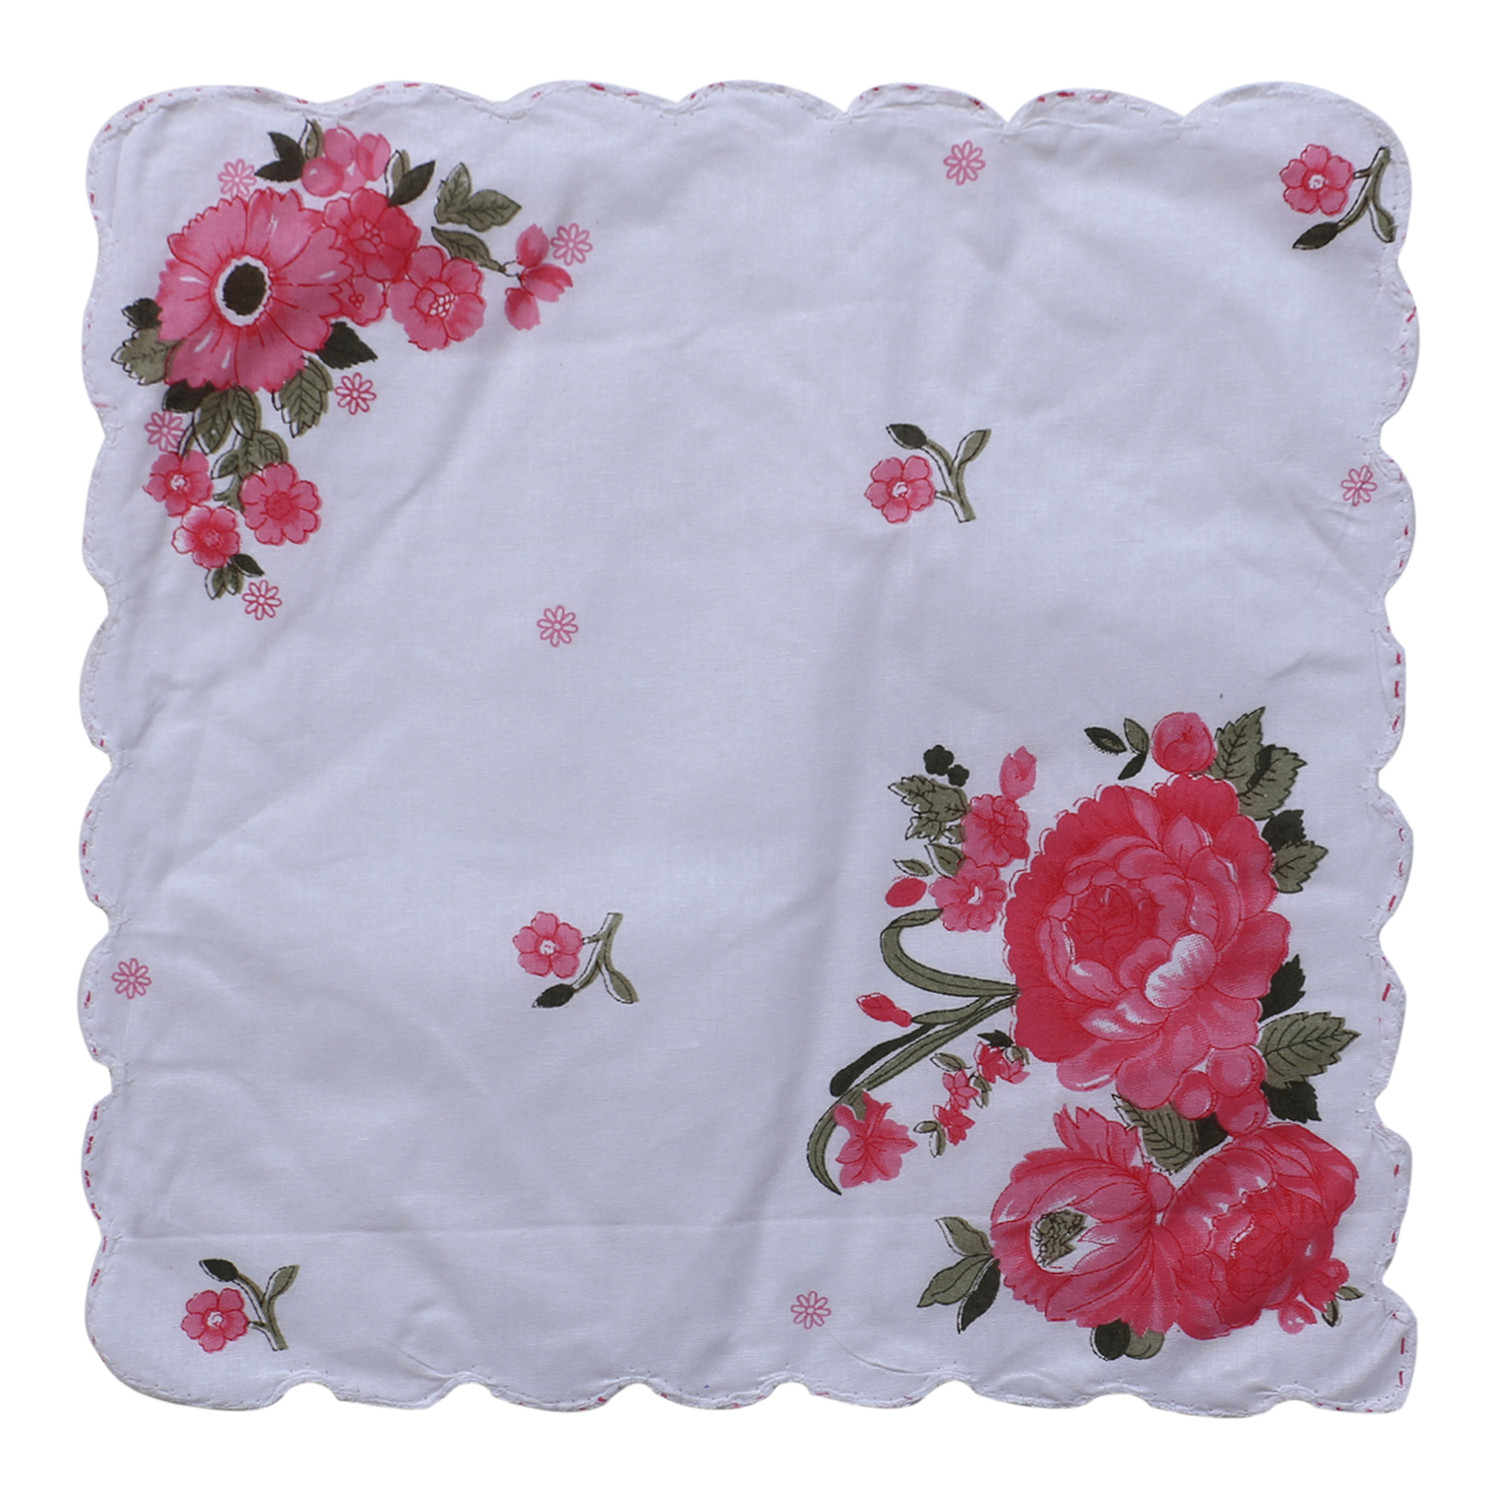 Kuber Industries Handkerchiefs|Multicolor Rose Print Cutwork Soft Cotton Hankies For Woman,Girls & Wicking Sweat from Hands,Face,Set of 12 (White)